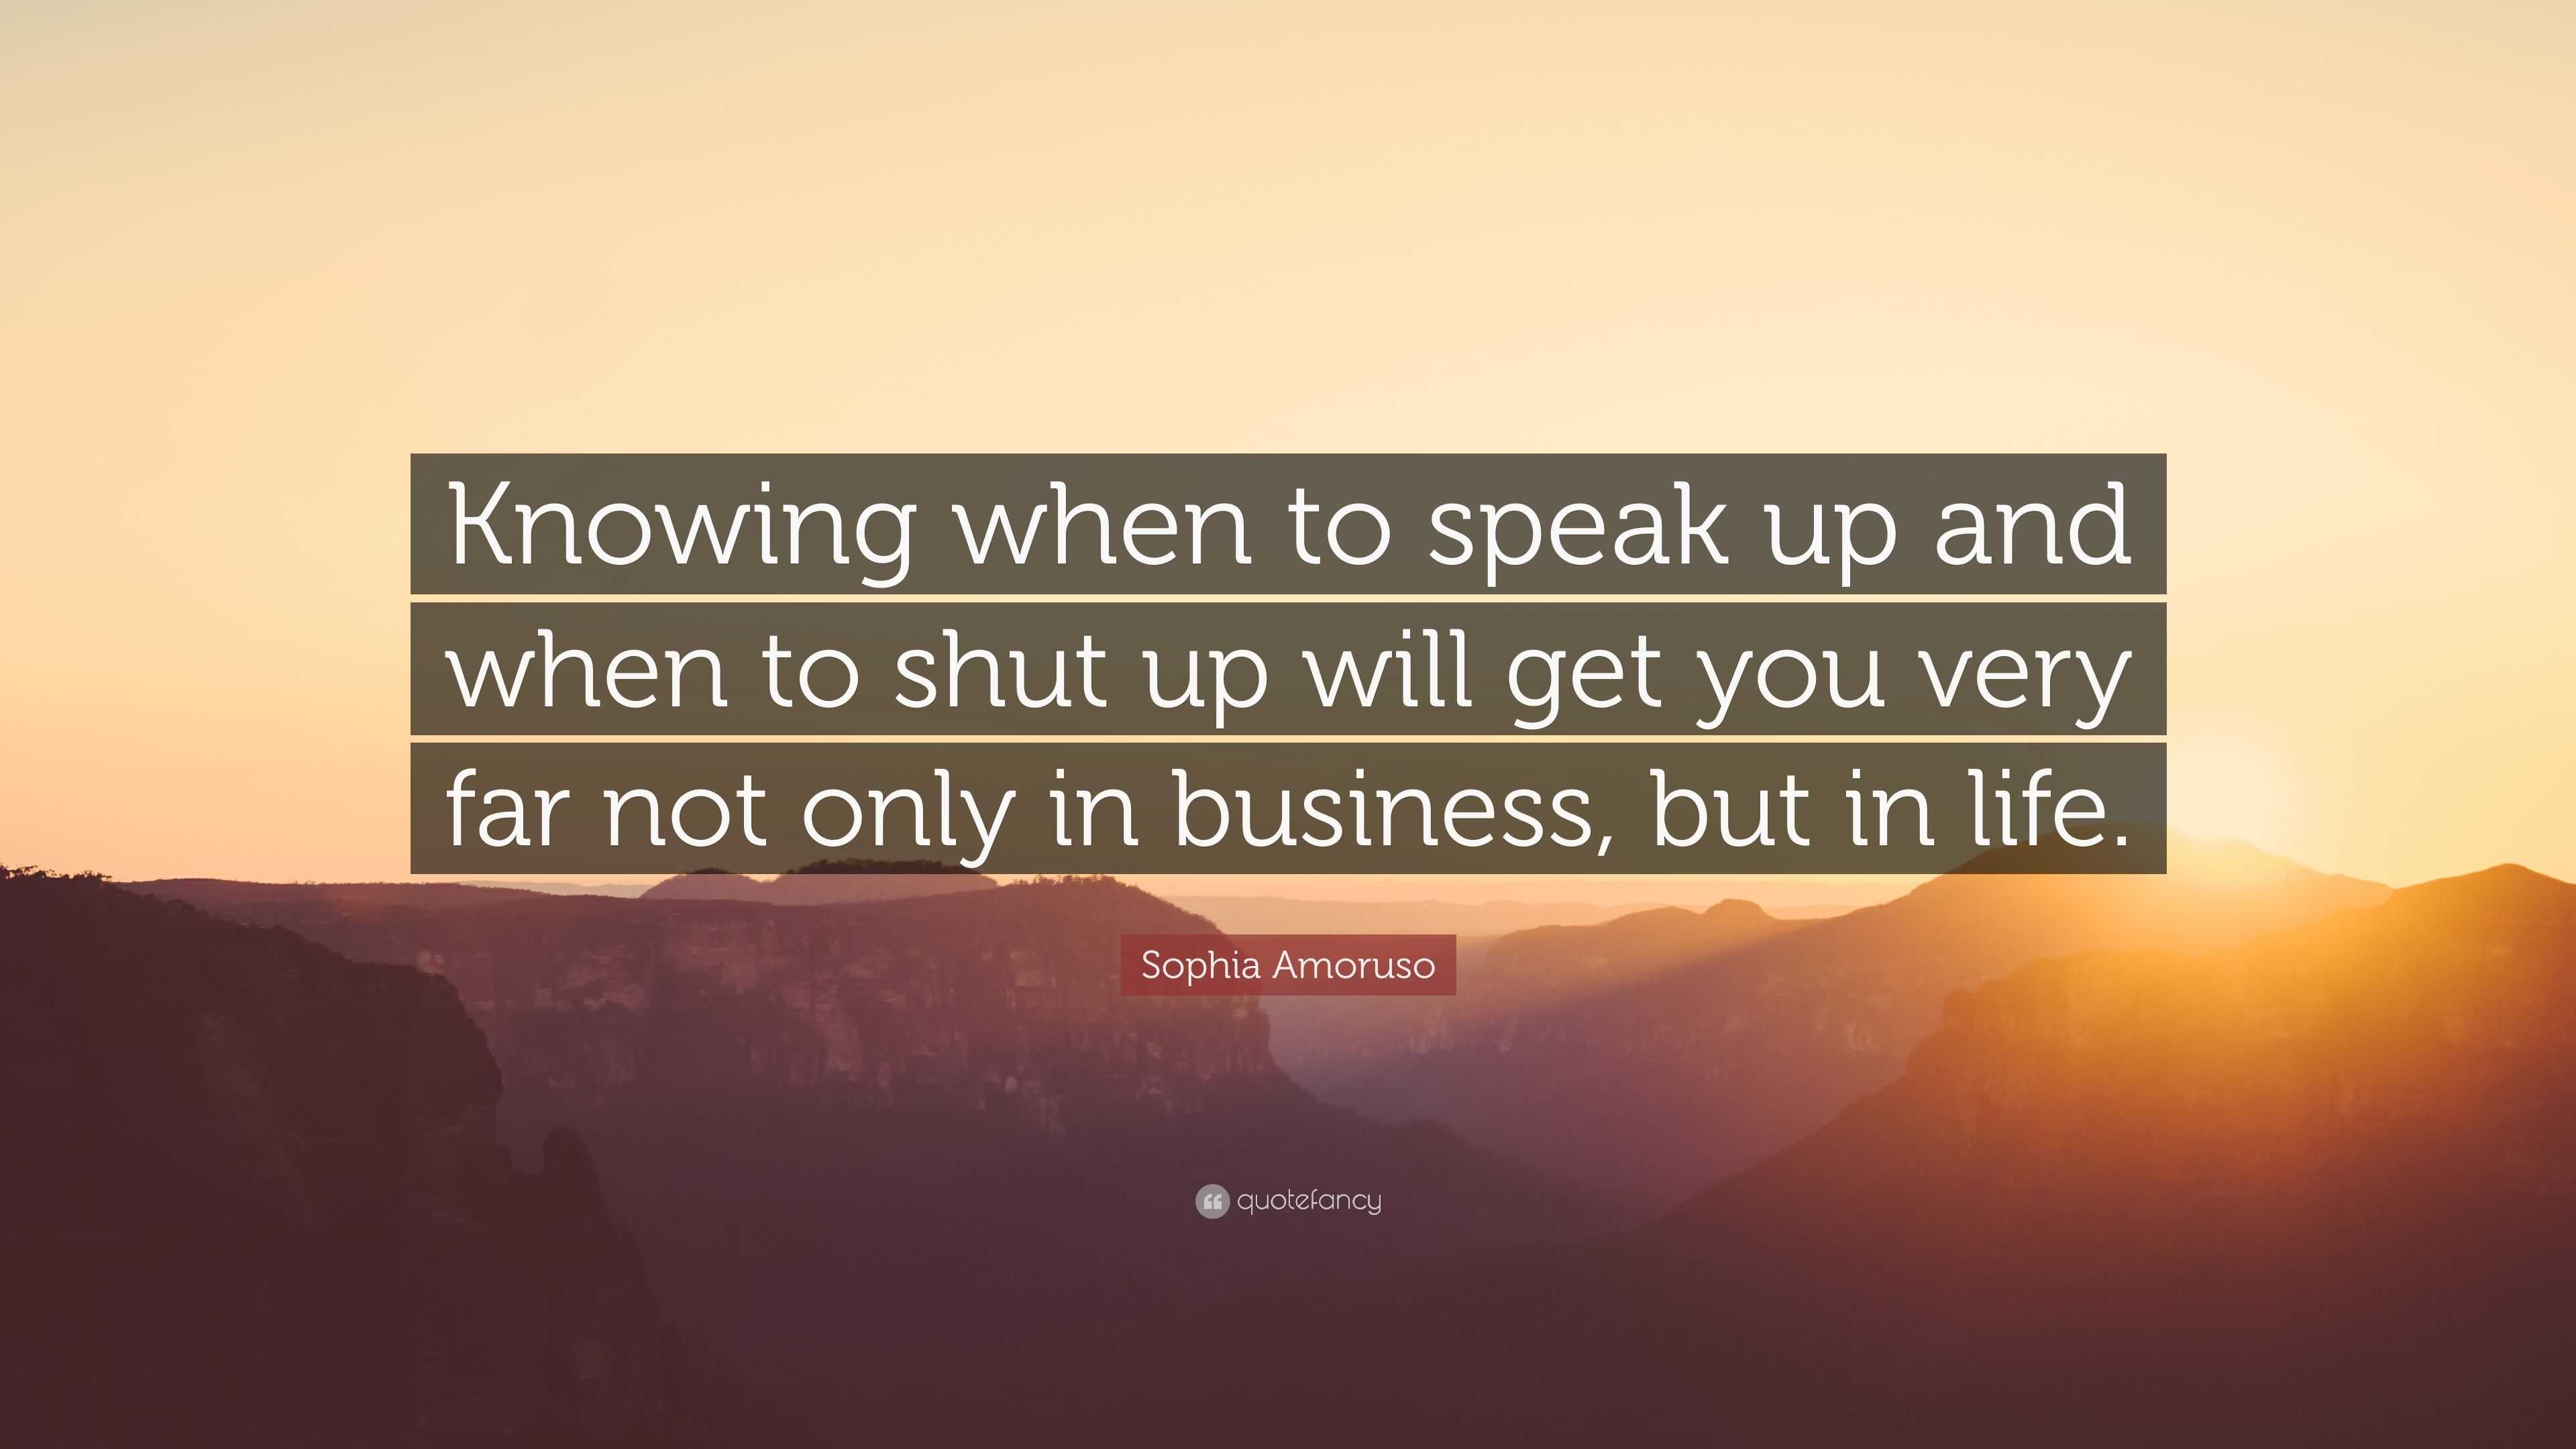 Sophia Amoruso Quote: “Knowing when to speak up and when to shut up ...